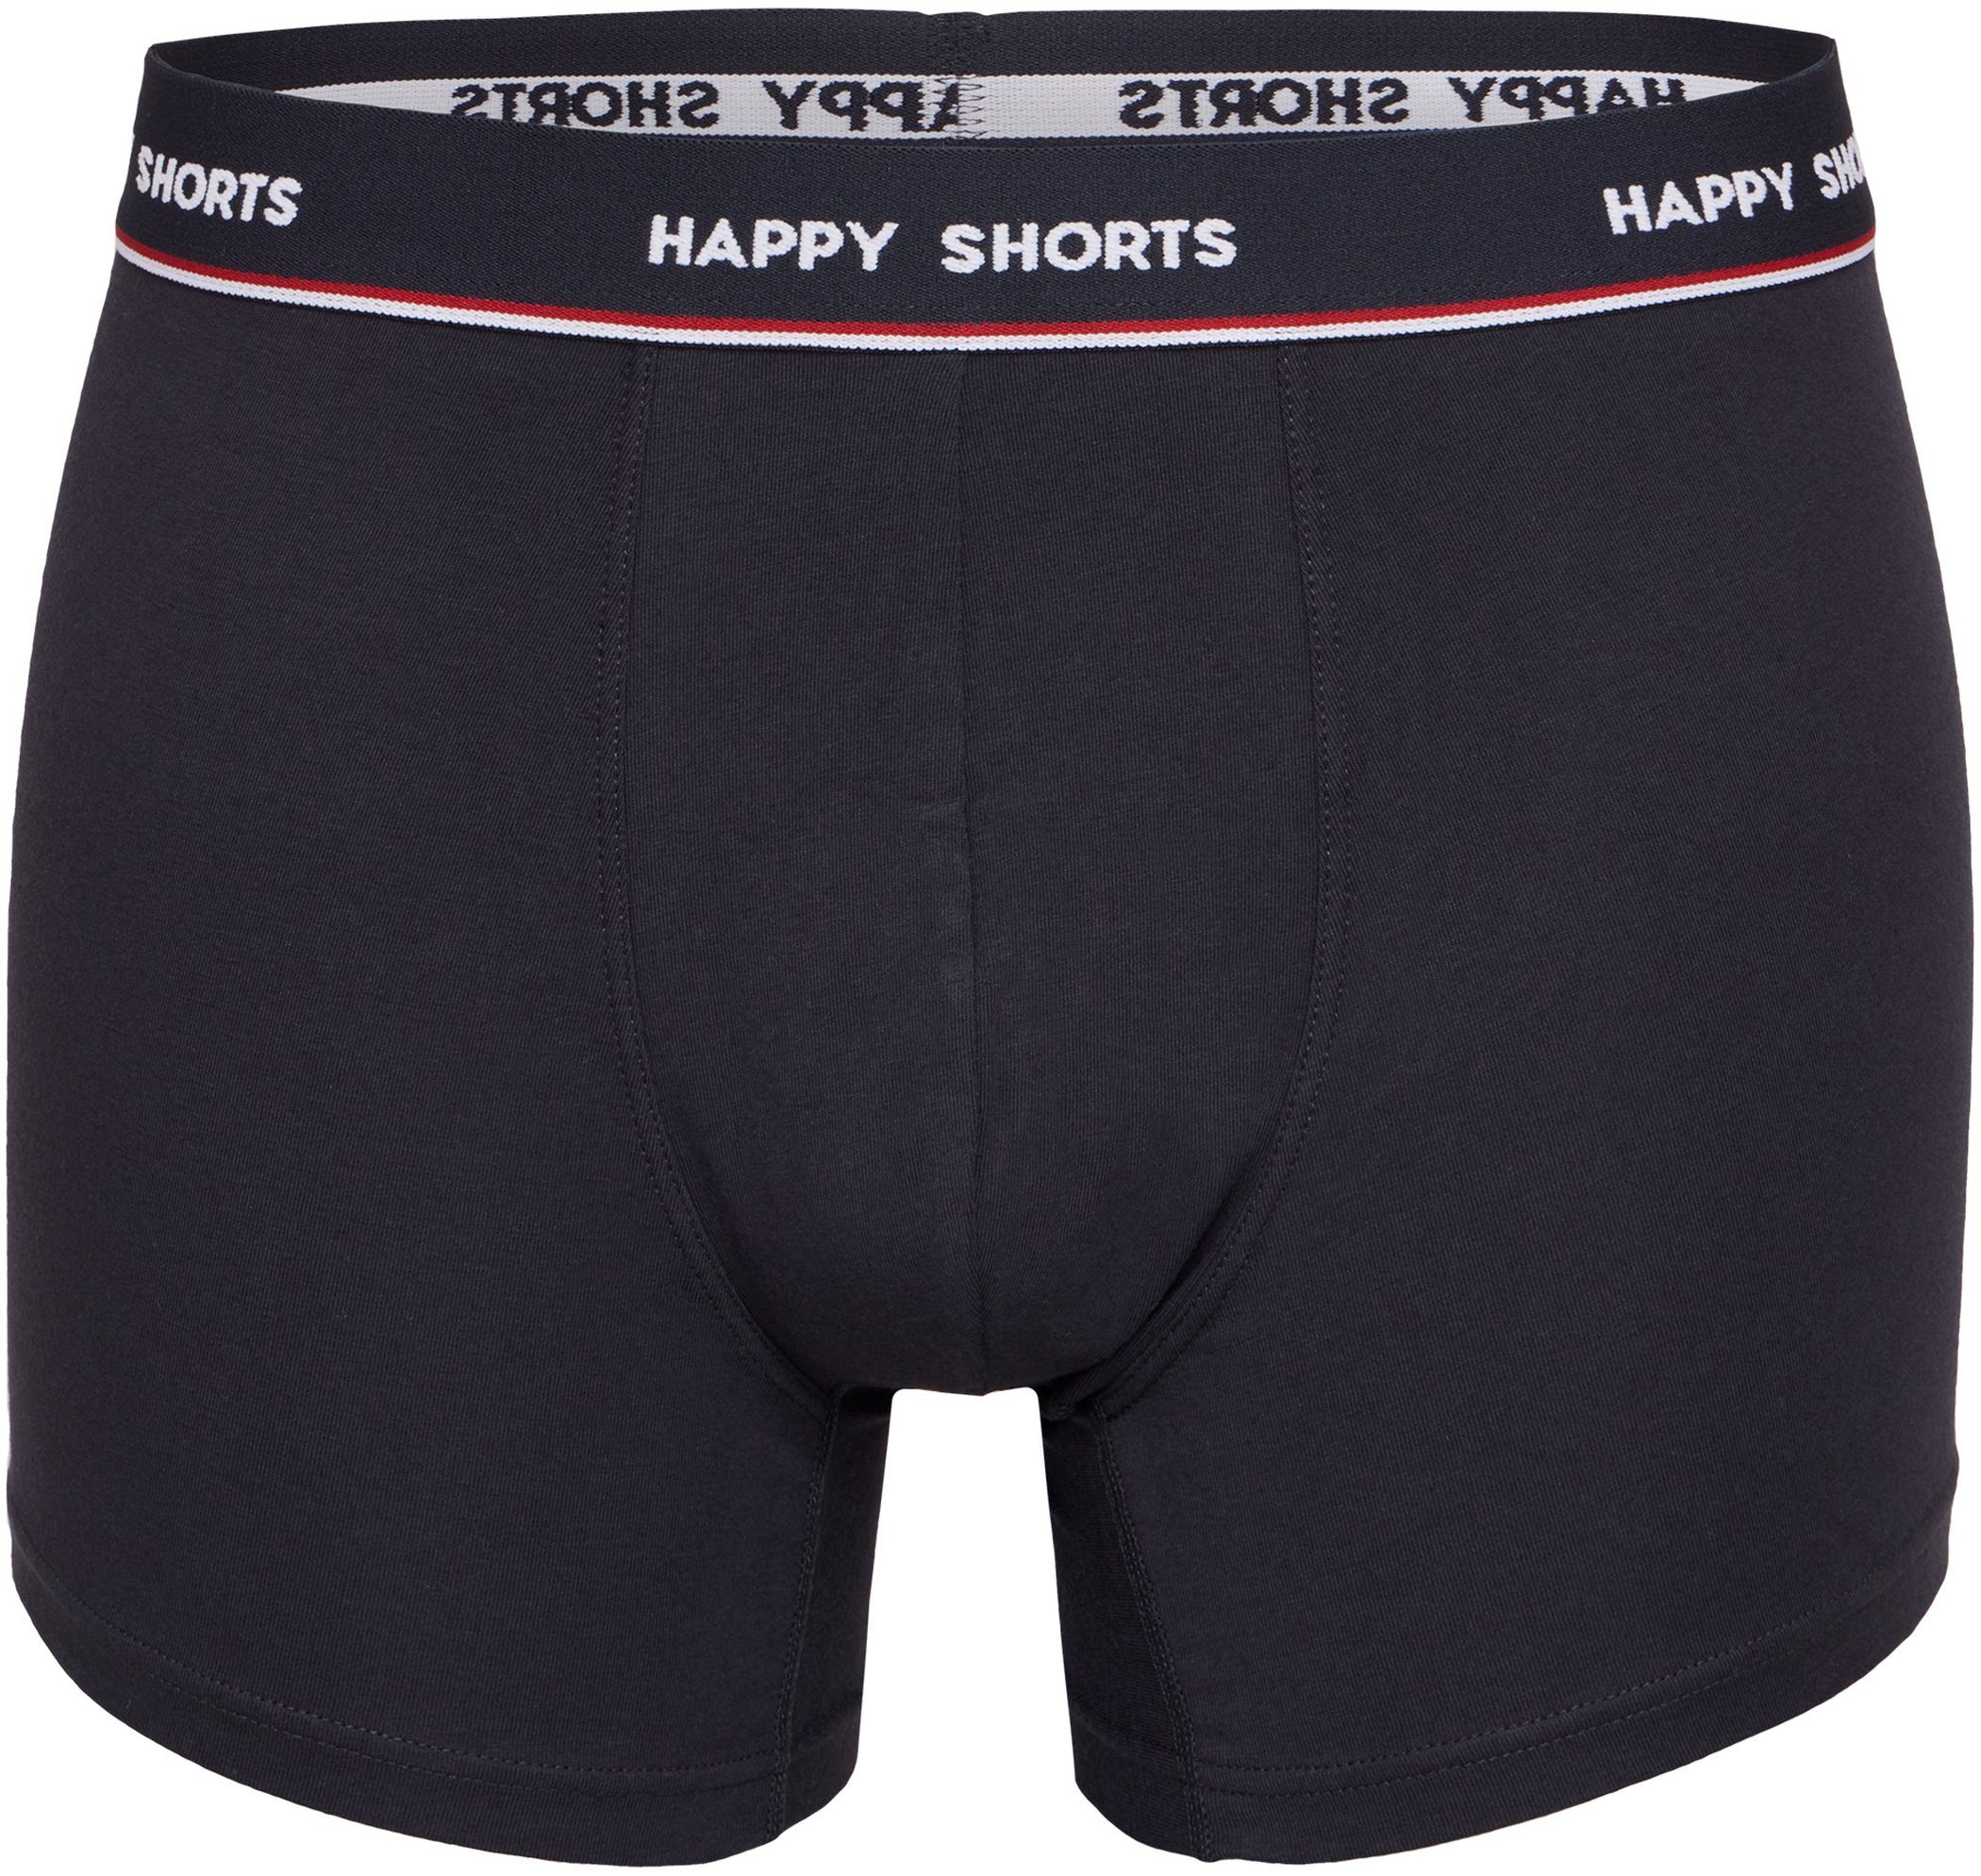 Pants Red Triangles Rote Shorts - HAPPY (1-St) SHORTS Jersey Herren Happy 2 Dreiecke Trunk Trunk